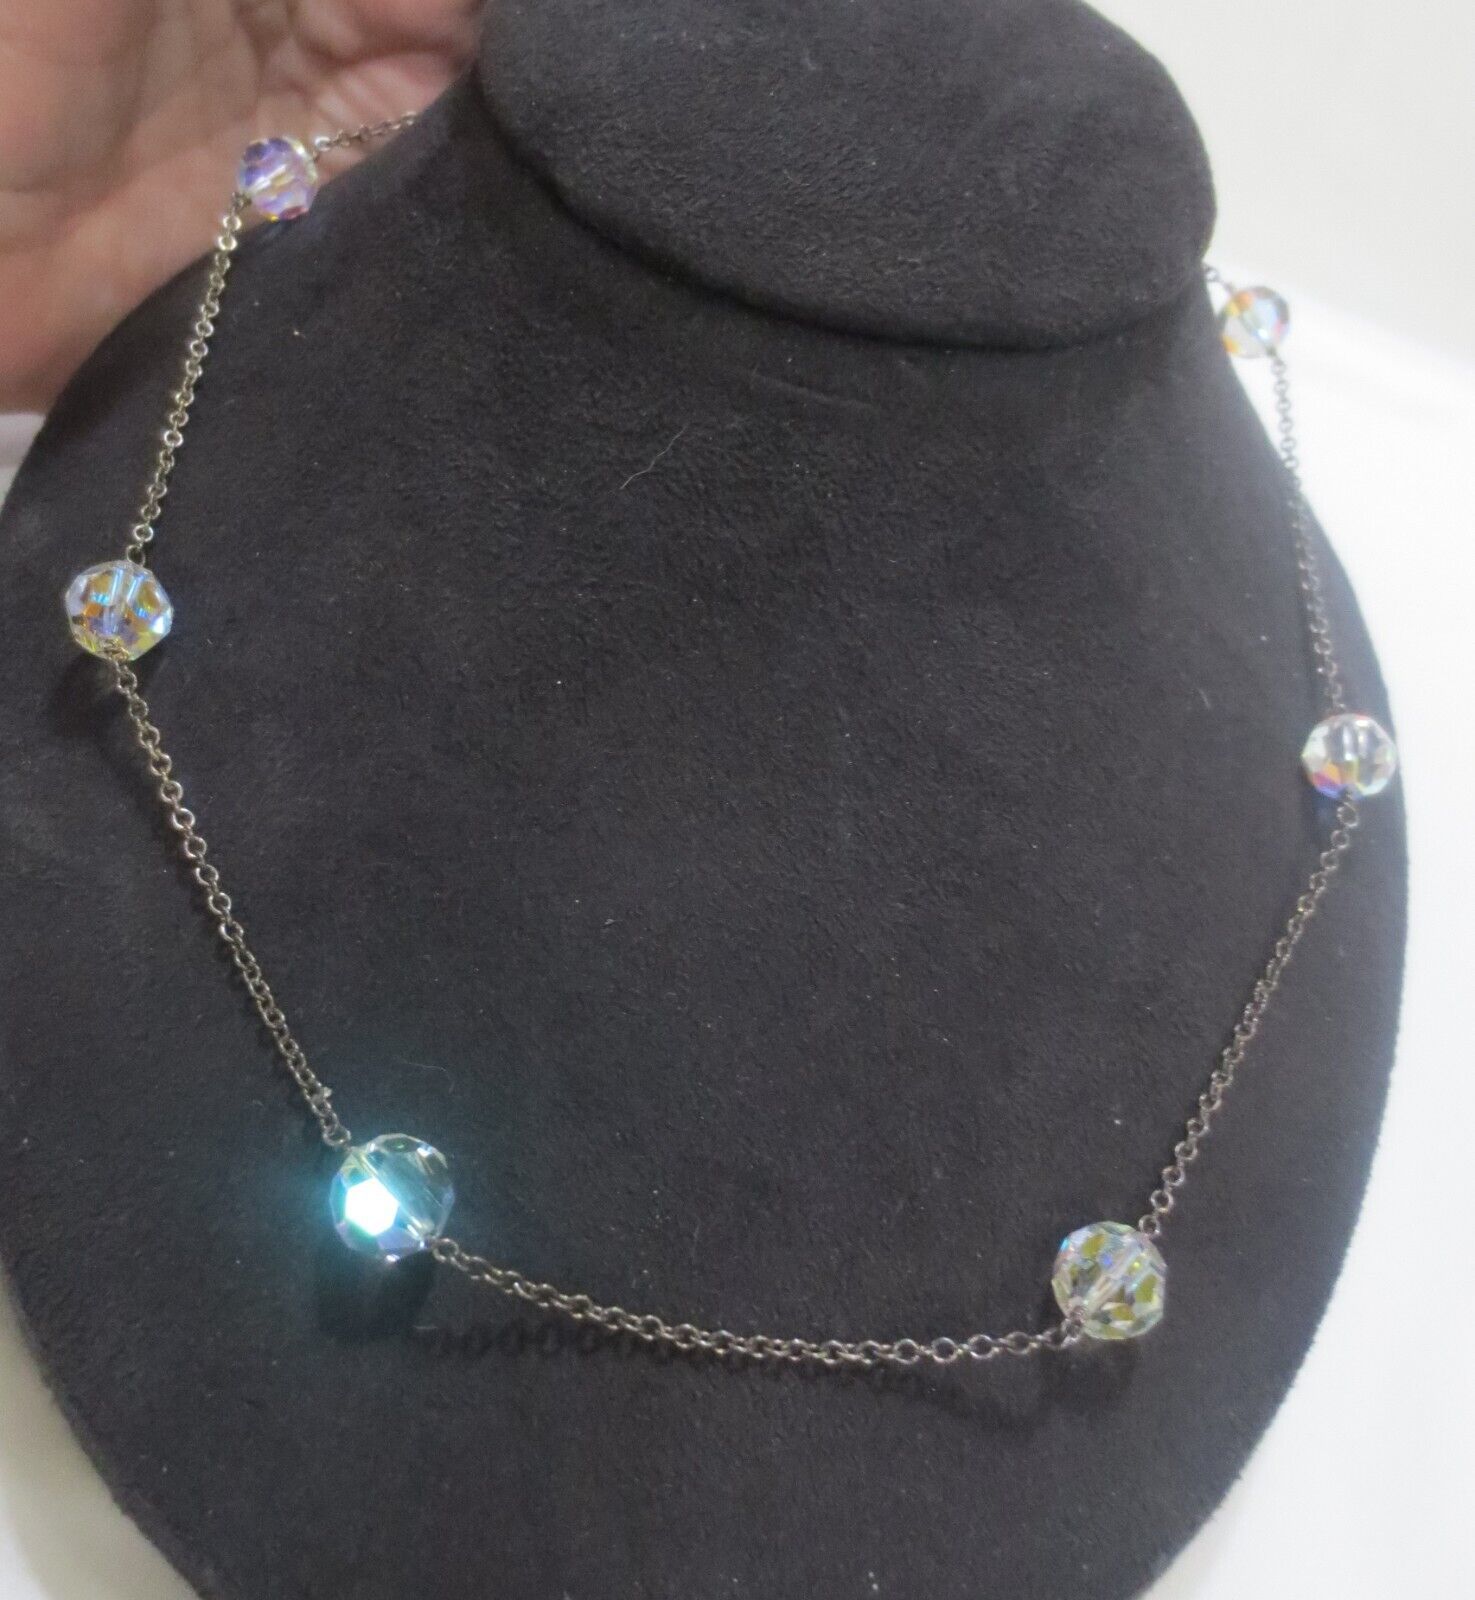 Swarovski Crystal Beaded Sterling Silver 925 chain necklace - $15.00